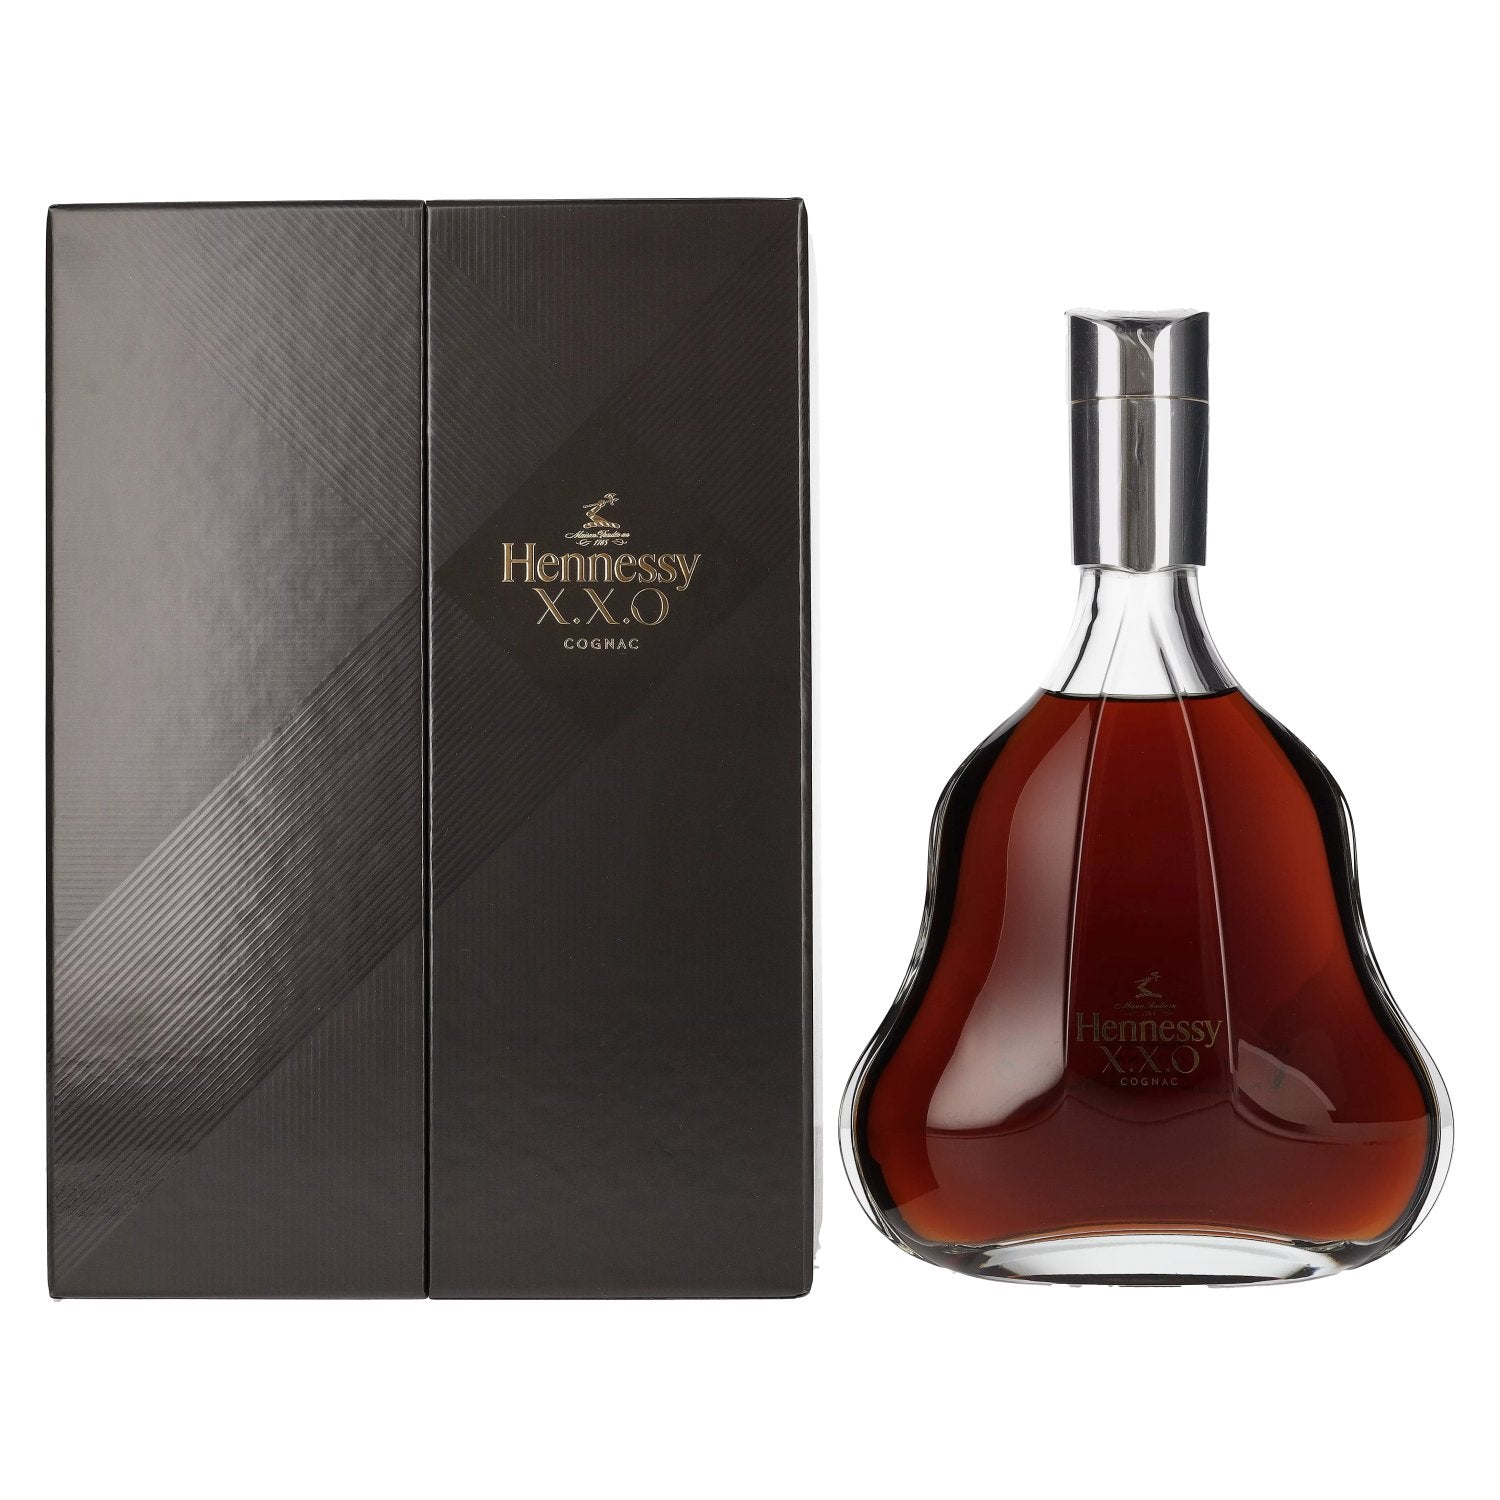 Hennessy X.X.O Cognac Hors D'Age 40% Vol. 1l in Giftbox